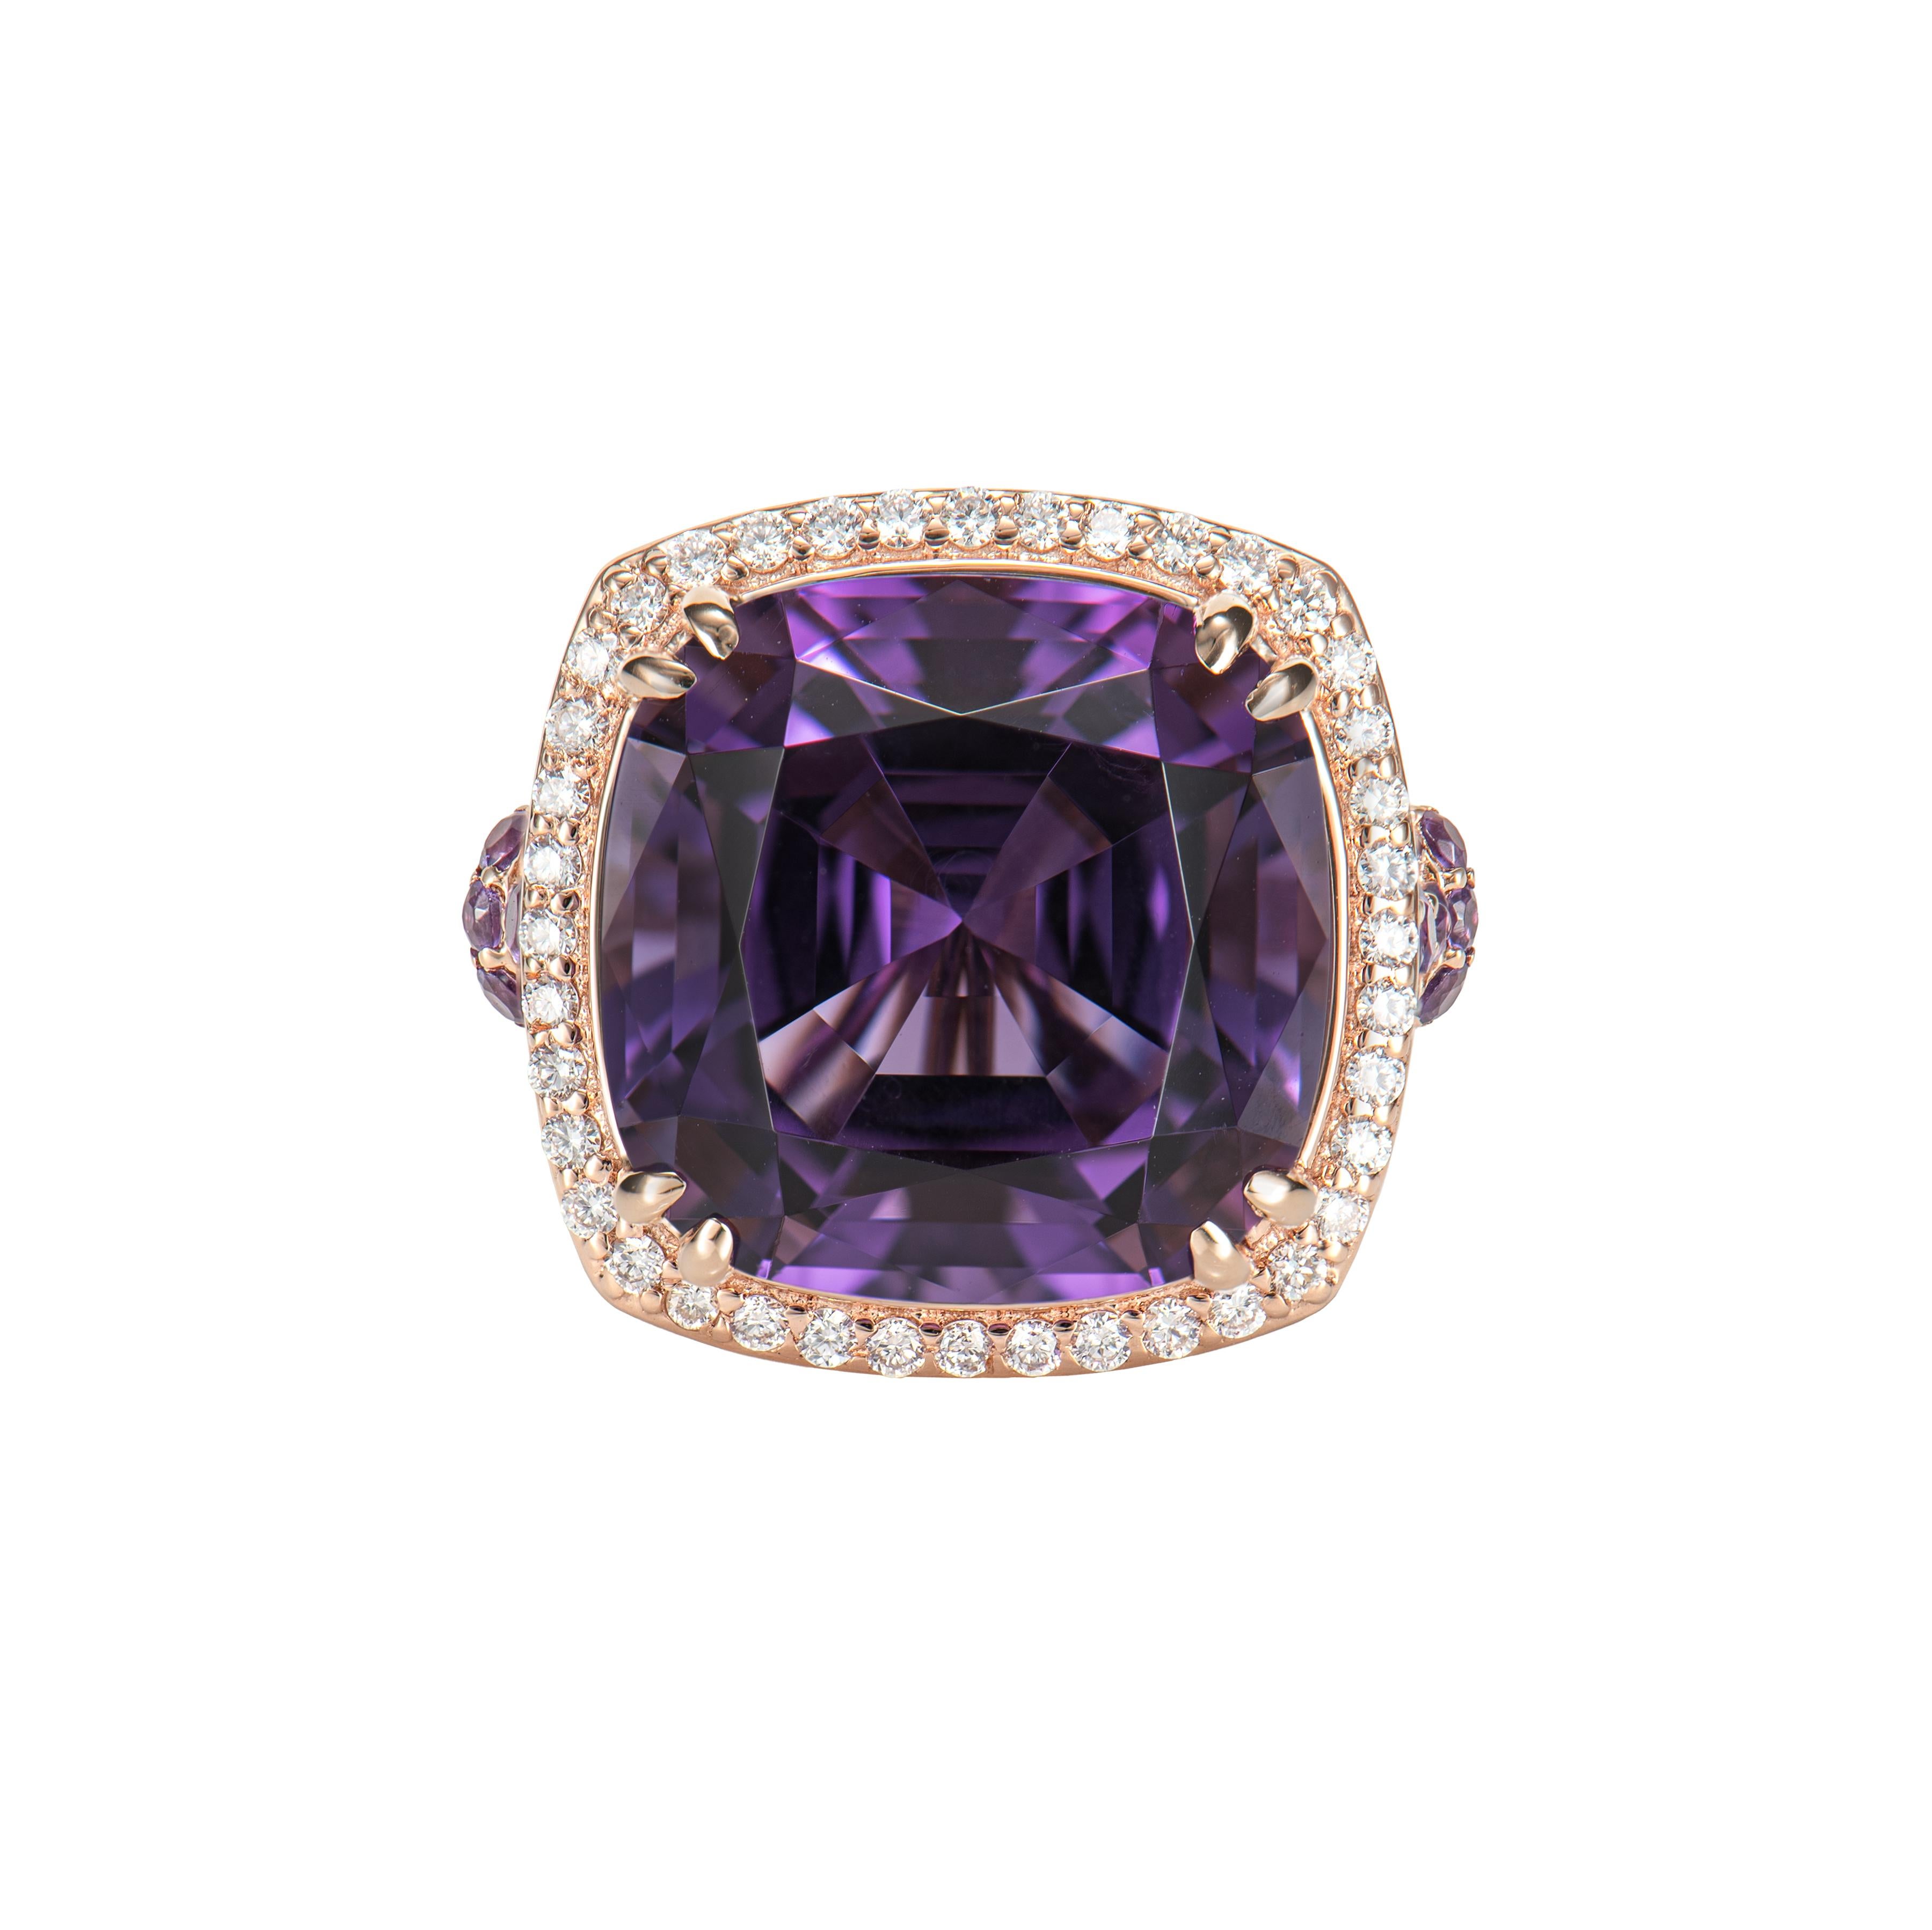 Contemporary 11.50 Carat Amethyst Cocktail Ring in 18 Karat Rose Gold with Diamond. For Sale